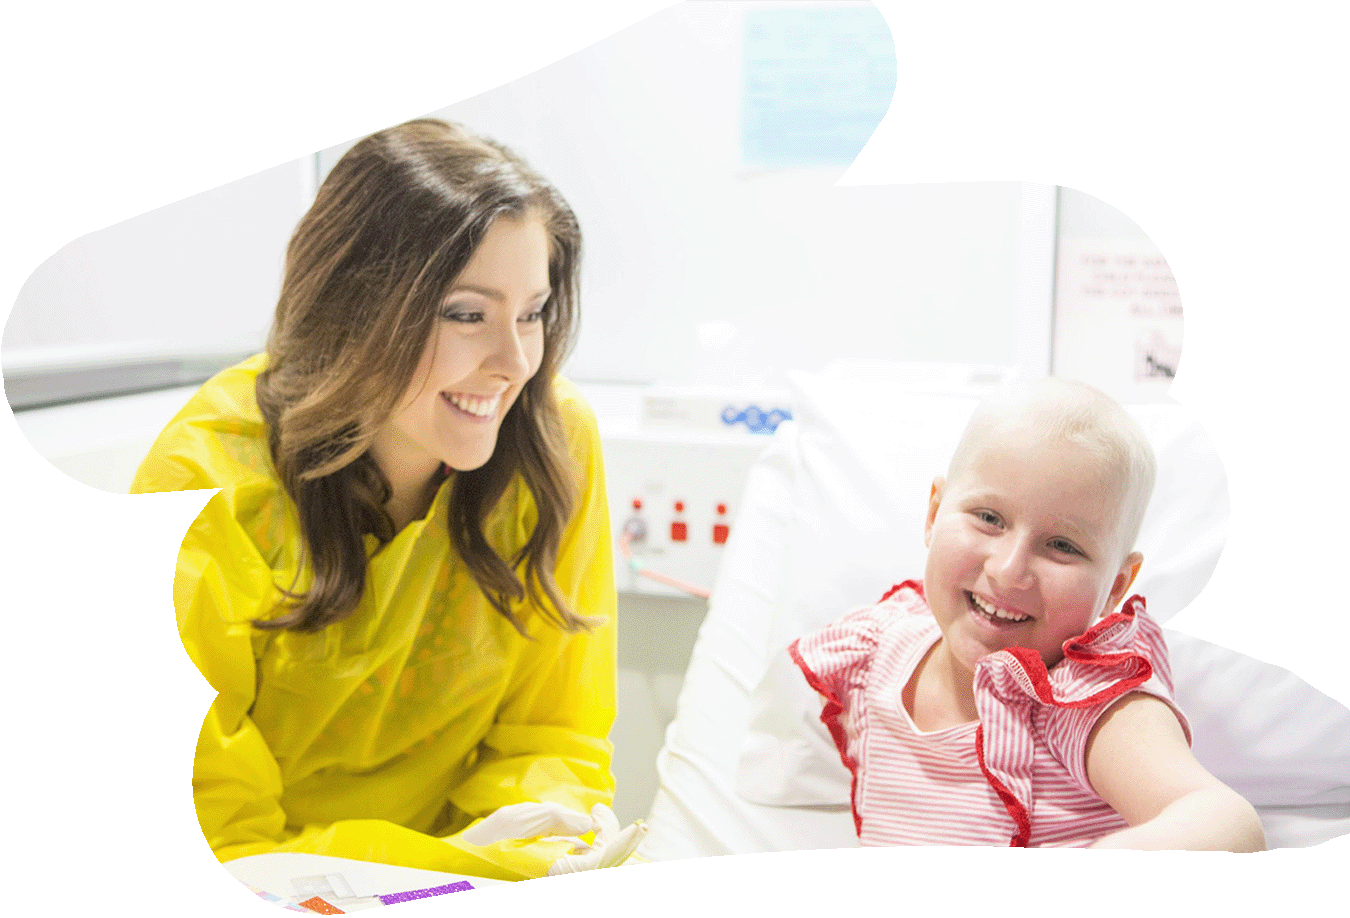 A Child Life Therapist sits at a child's bedside in hospital